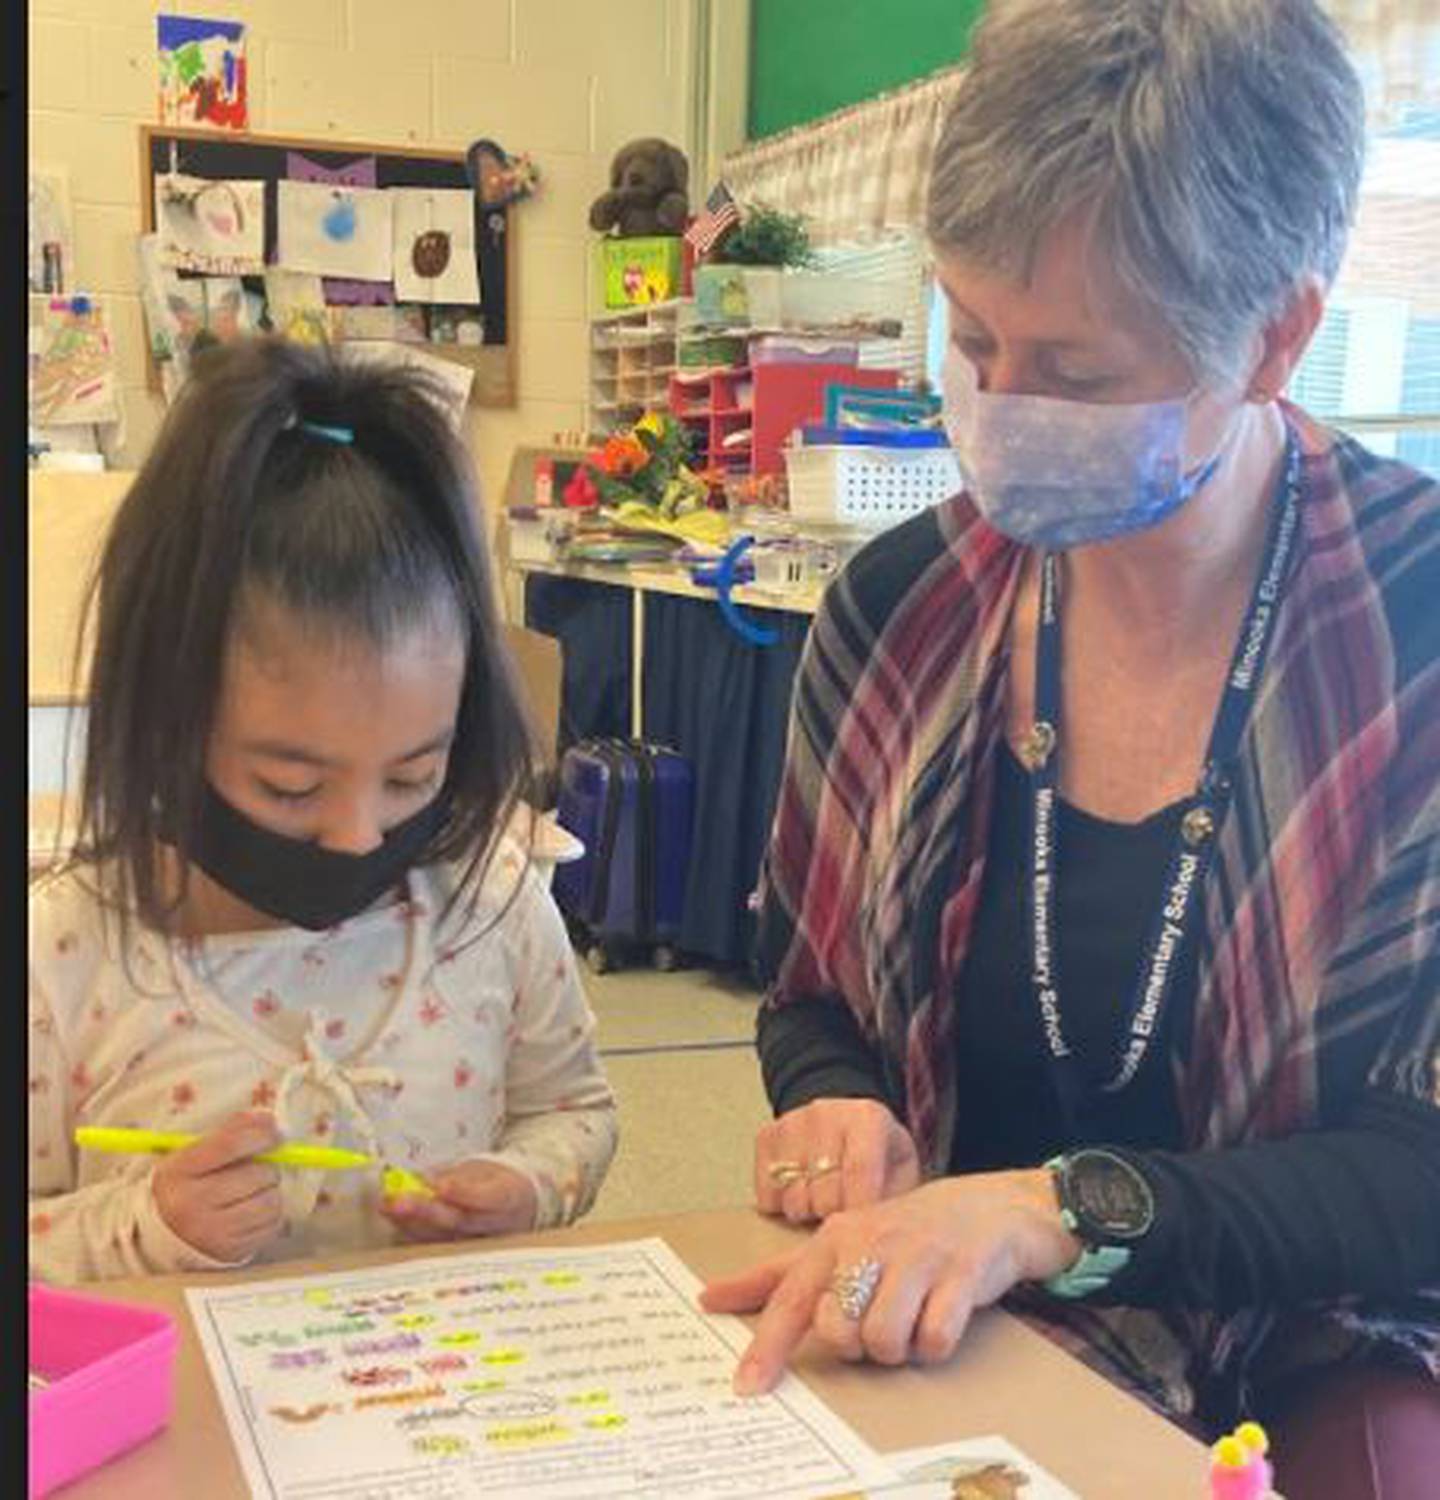 Sara Smith, a teacher in Minooka School District 201's multilingual program, helps Anita Magali find sight words as part of her literacy block.